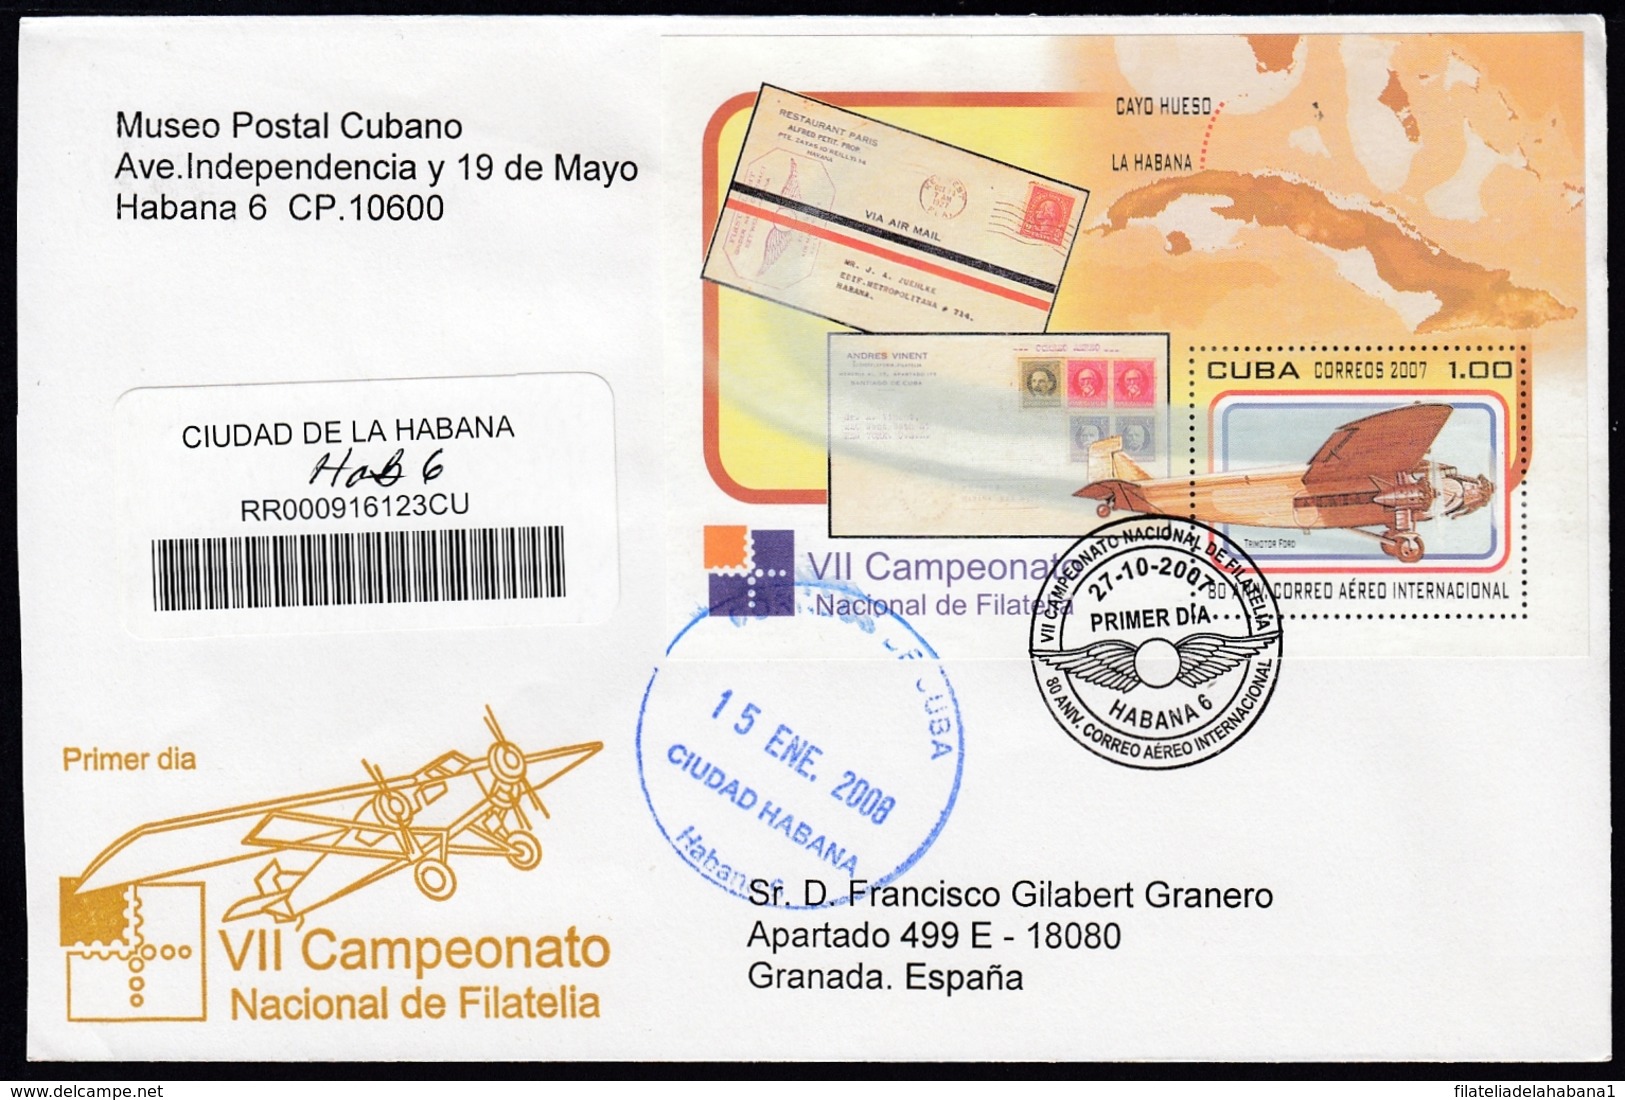 2007-FDC-105 CUBA FDC 2007. REGISTERED COVER TO SPAIN. HF CAMPEONATO NAC FILATELIA, AIR MAIL FIRST FLIGHT - FDC